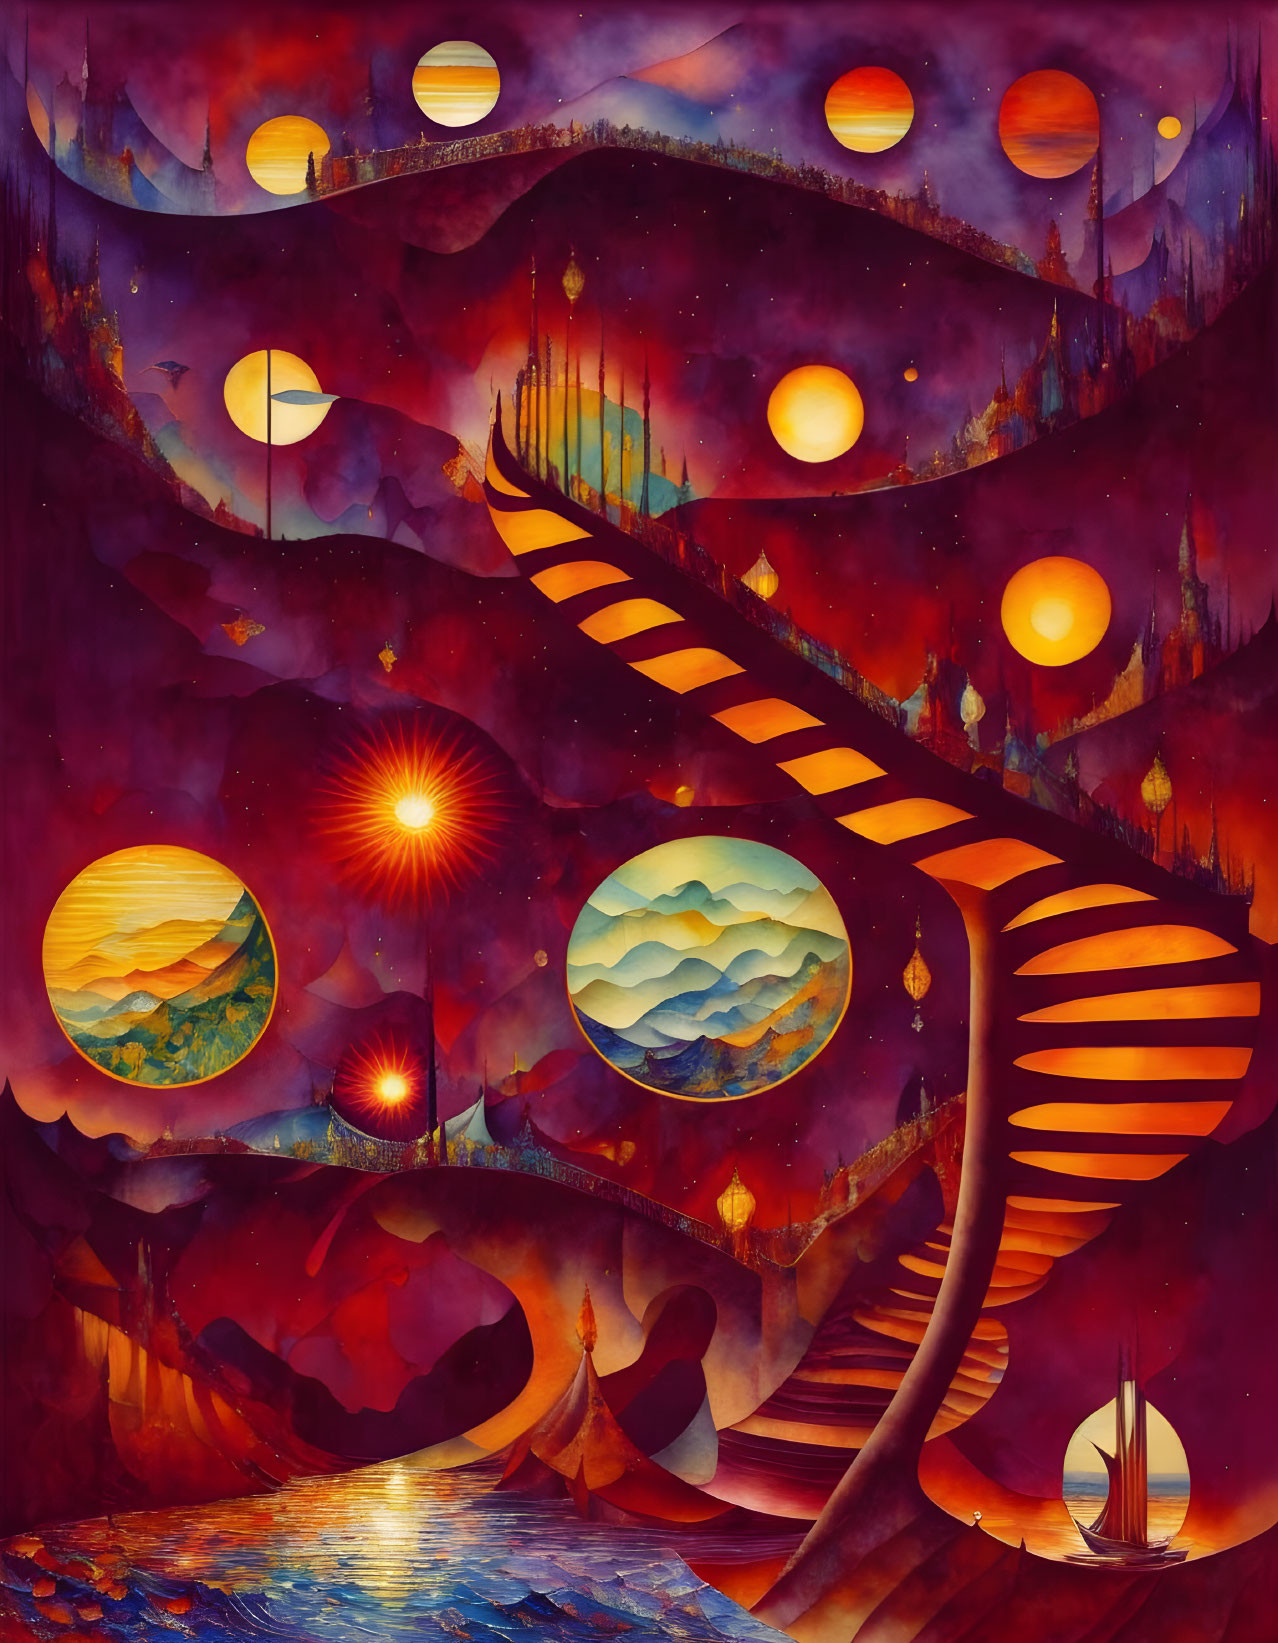 Surreal landscape with multiple suns, vibrant sky, winding staircase, gate, and boats in